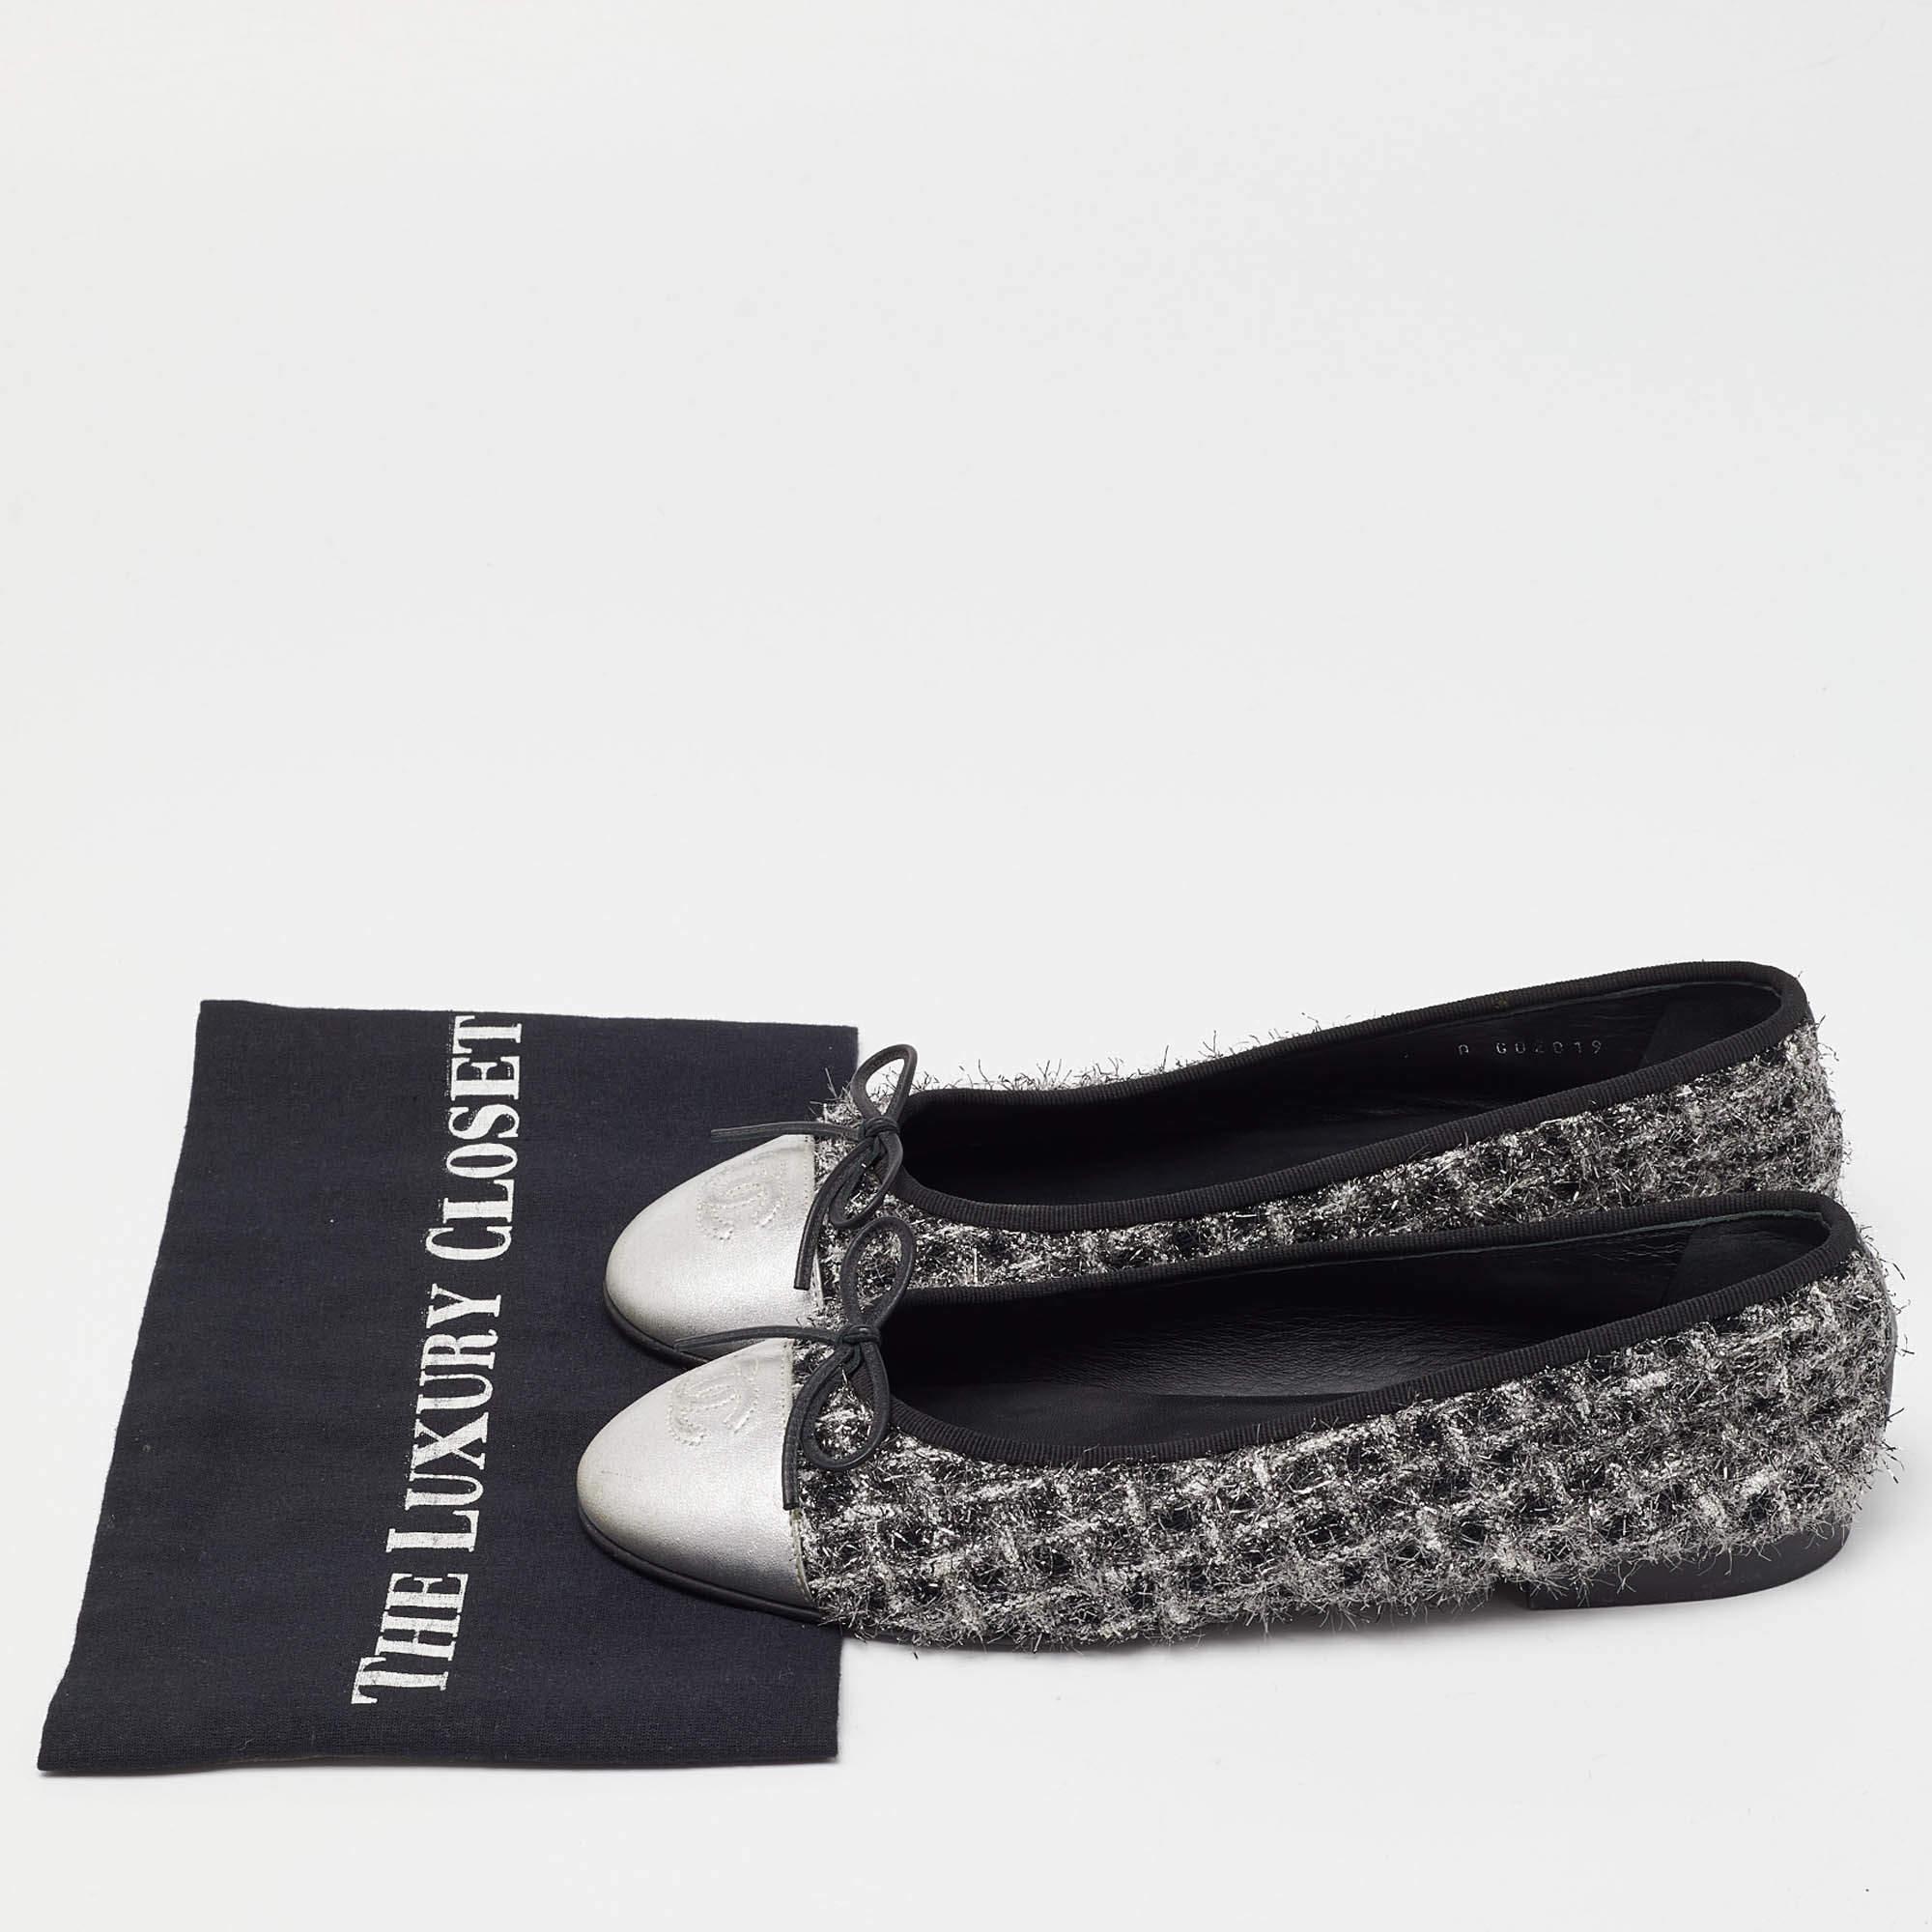 Chanel Black/Silver Tweed and Leather CC Ballet Flats Size 39 5